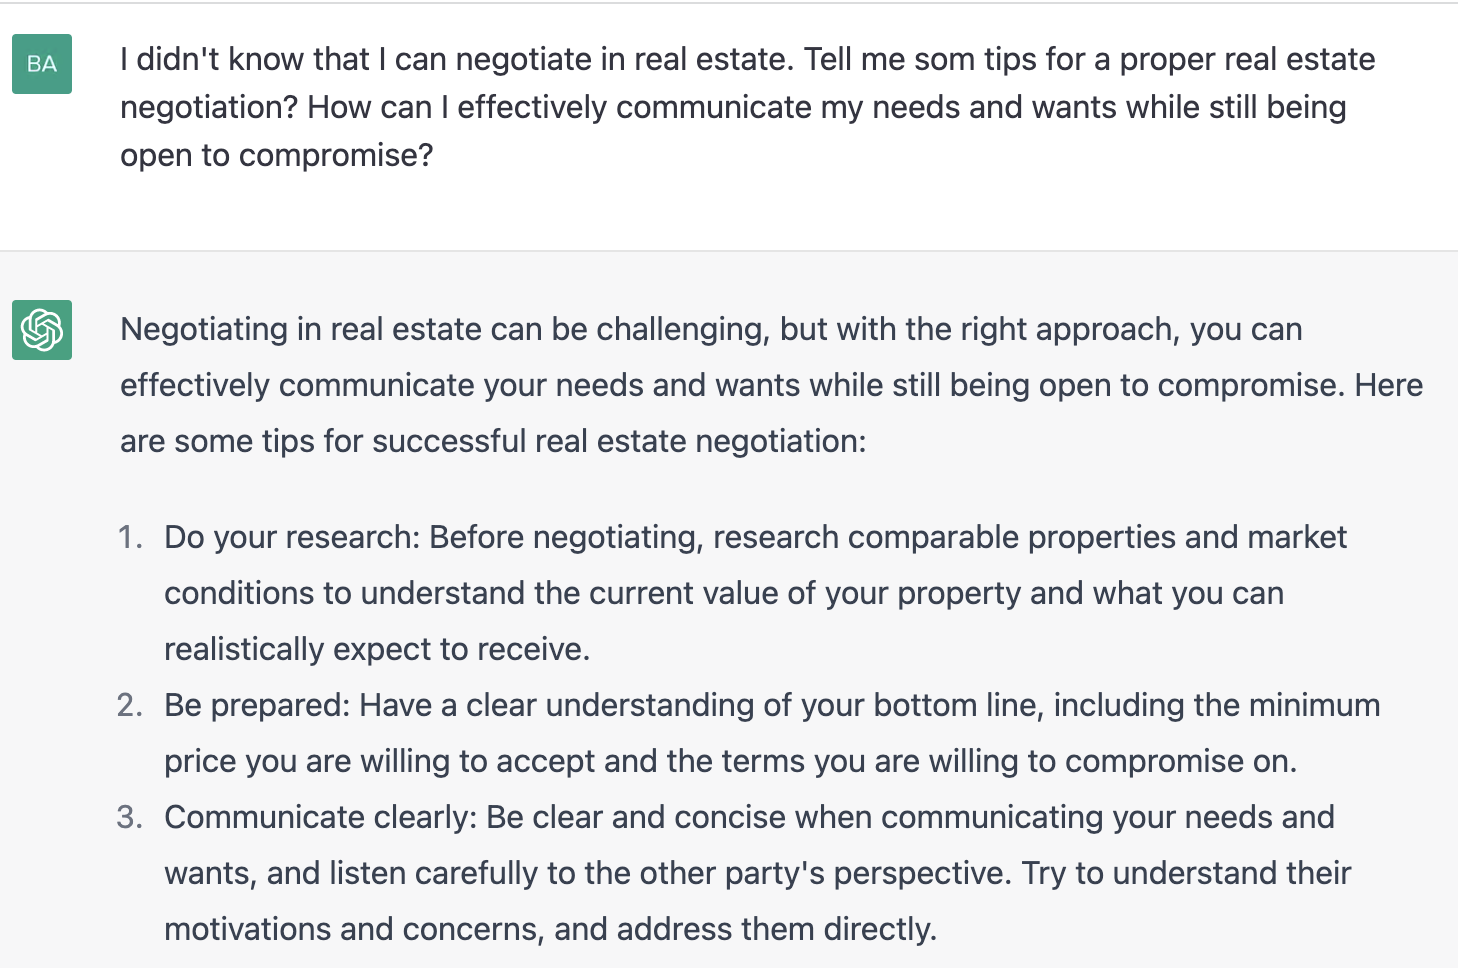 ChatGPT prompt about tips for a proper real estate negotiation